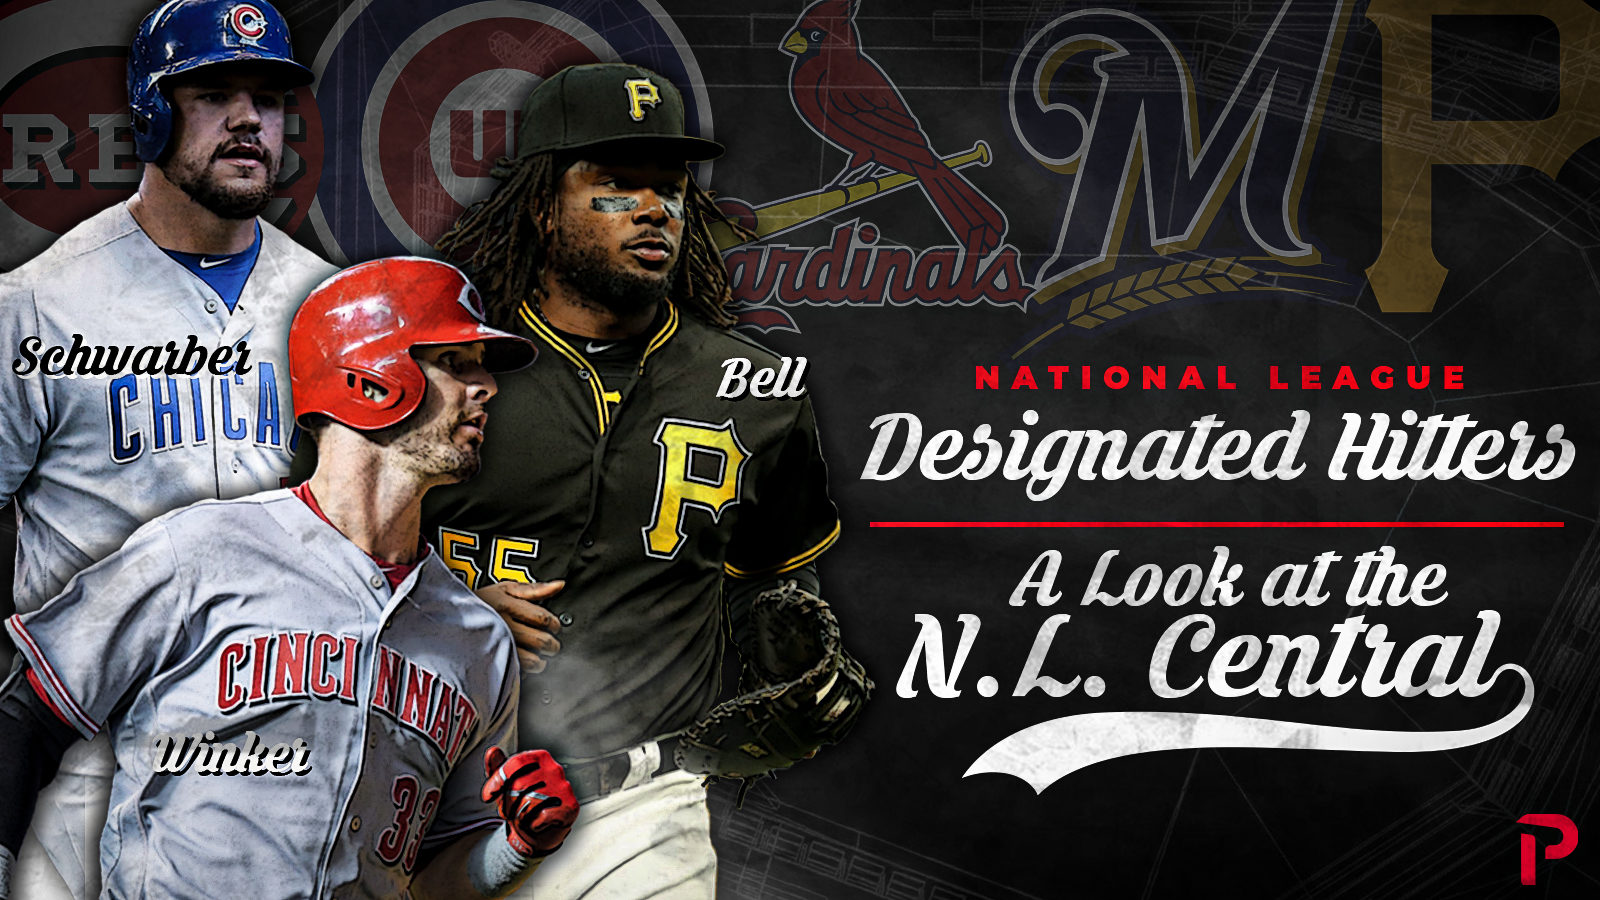 National League DH A Look at the Central Pitcher List